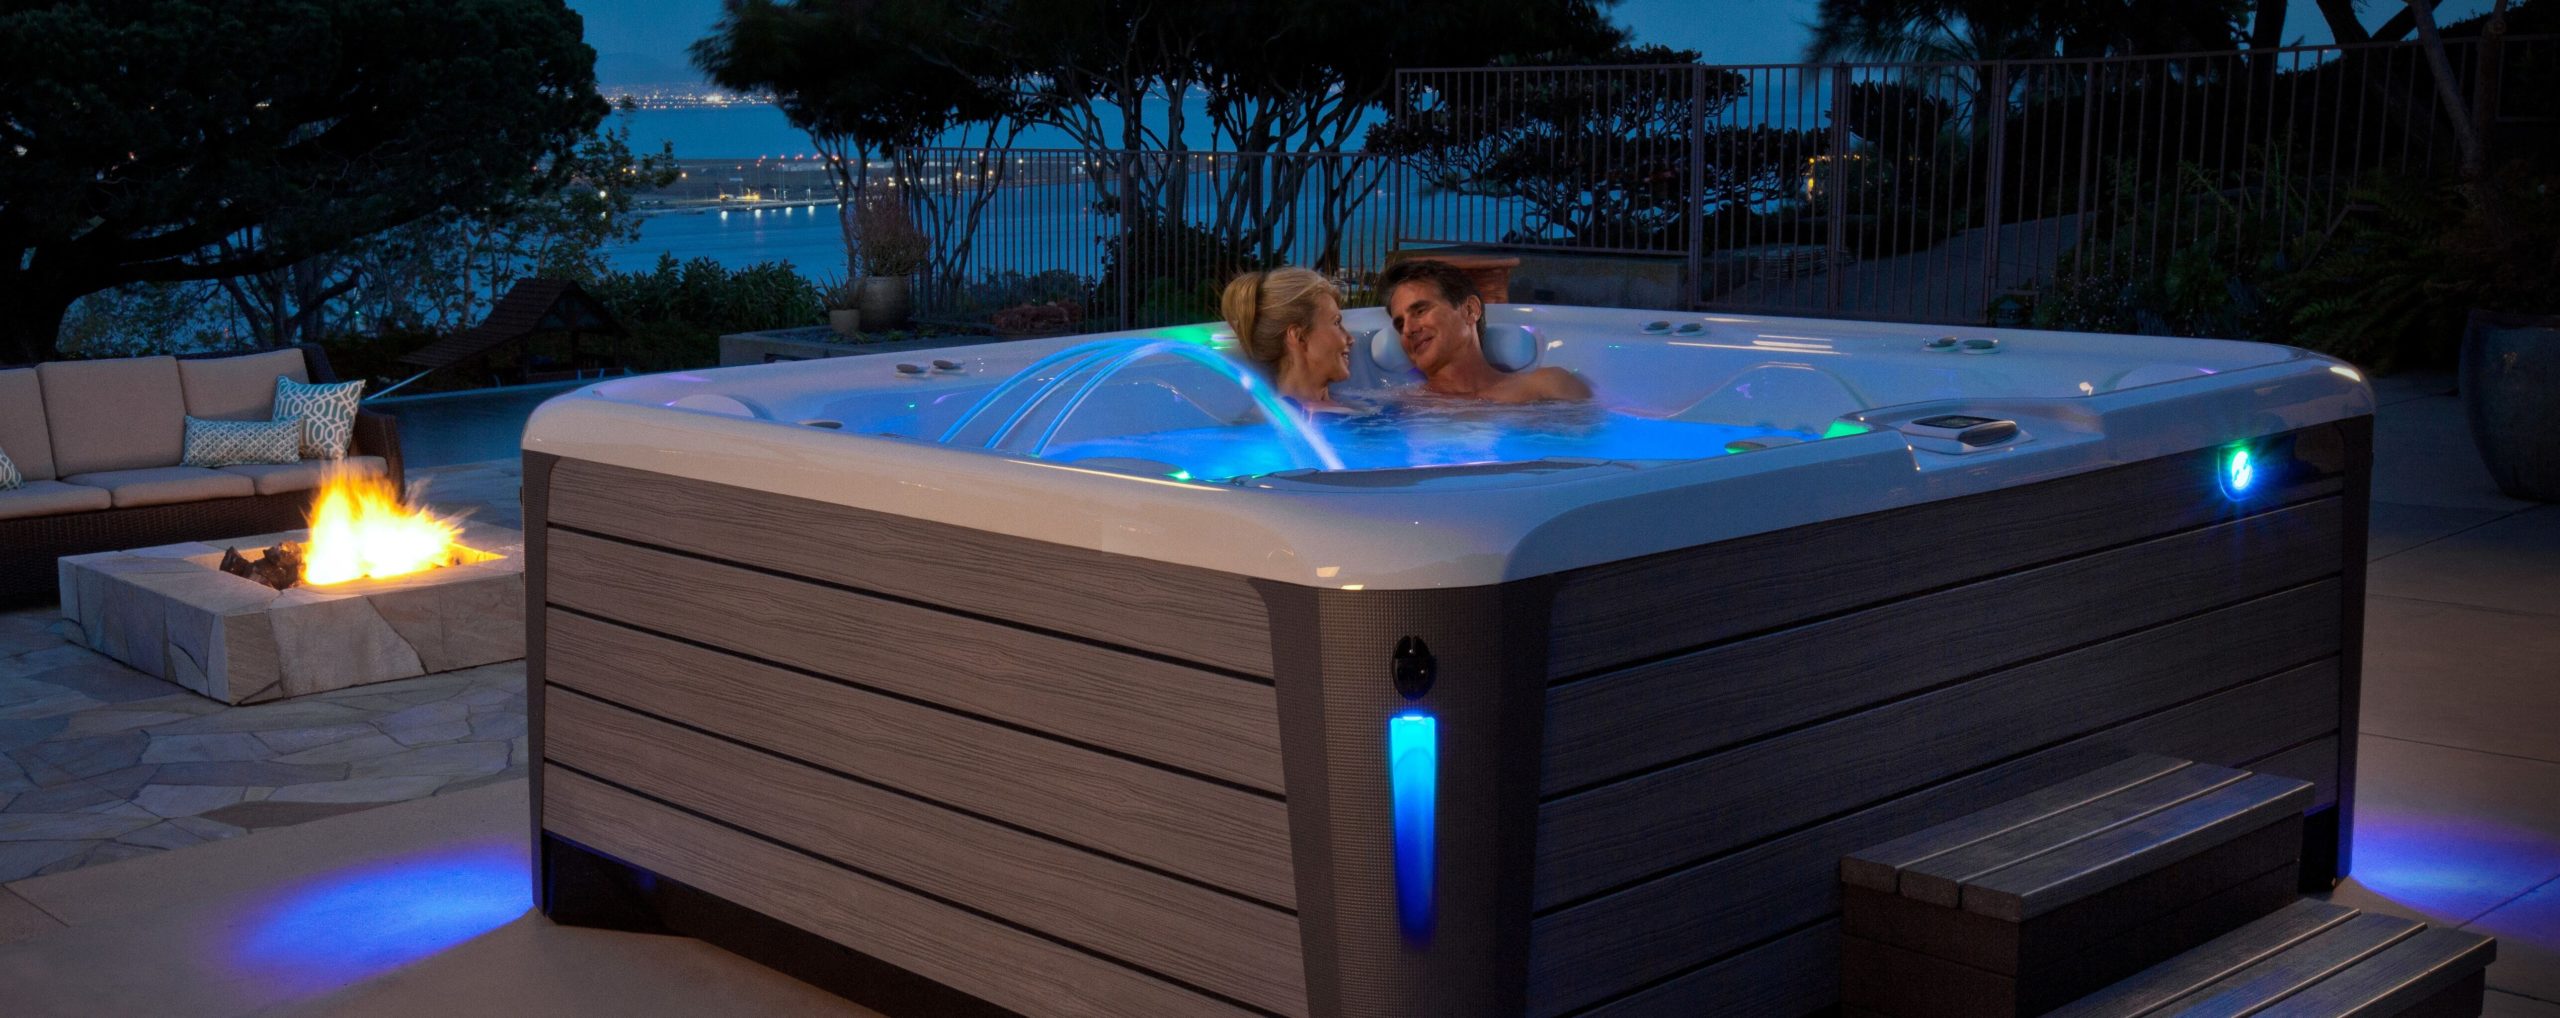 How Much Does a Hot Tub Affect Your Electric Bill?